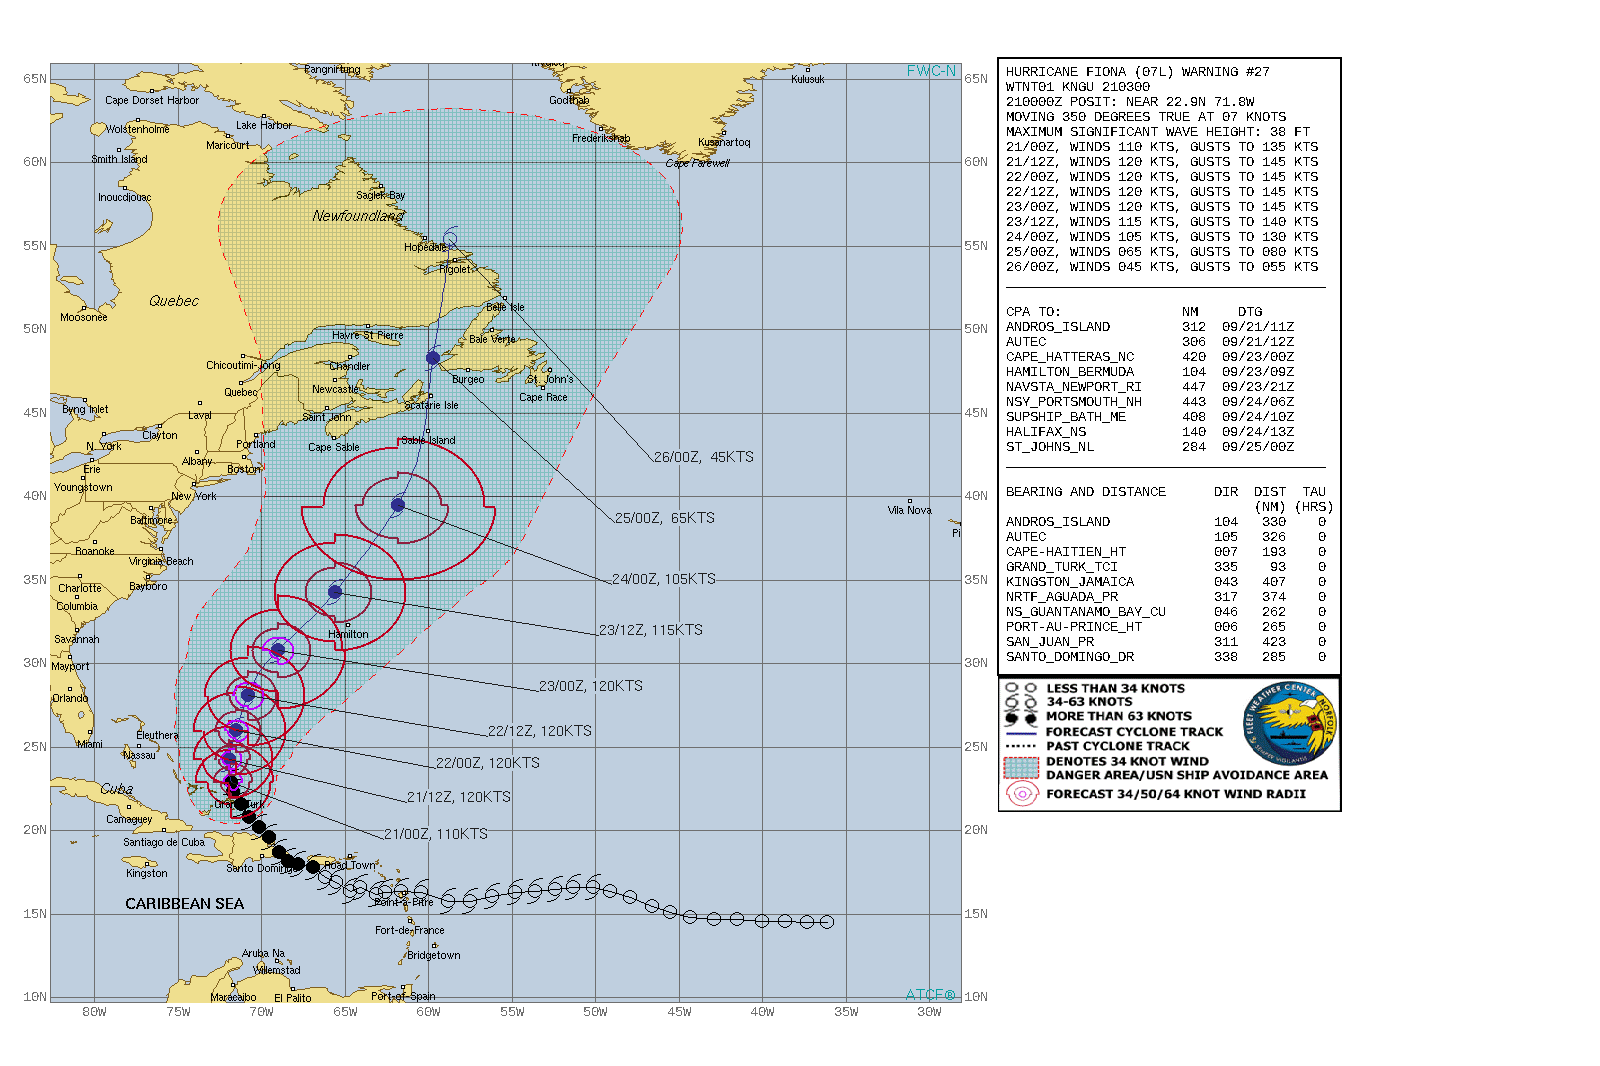 Invest 94W: TC Formation Alert//Invest 95W: on the map//HU 07L(FIONA): up to strong CAT 4 within 24H//TS 08L(GASTON)//2109utc